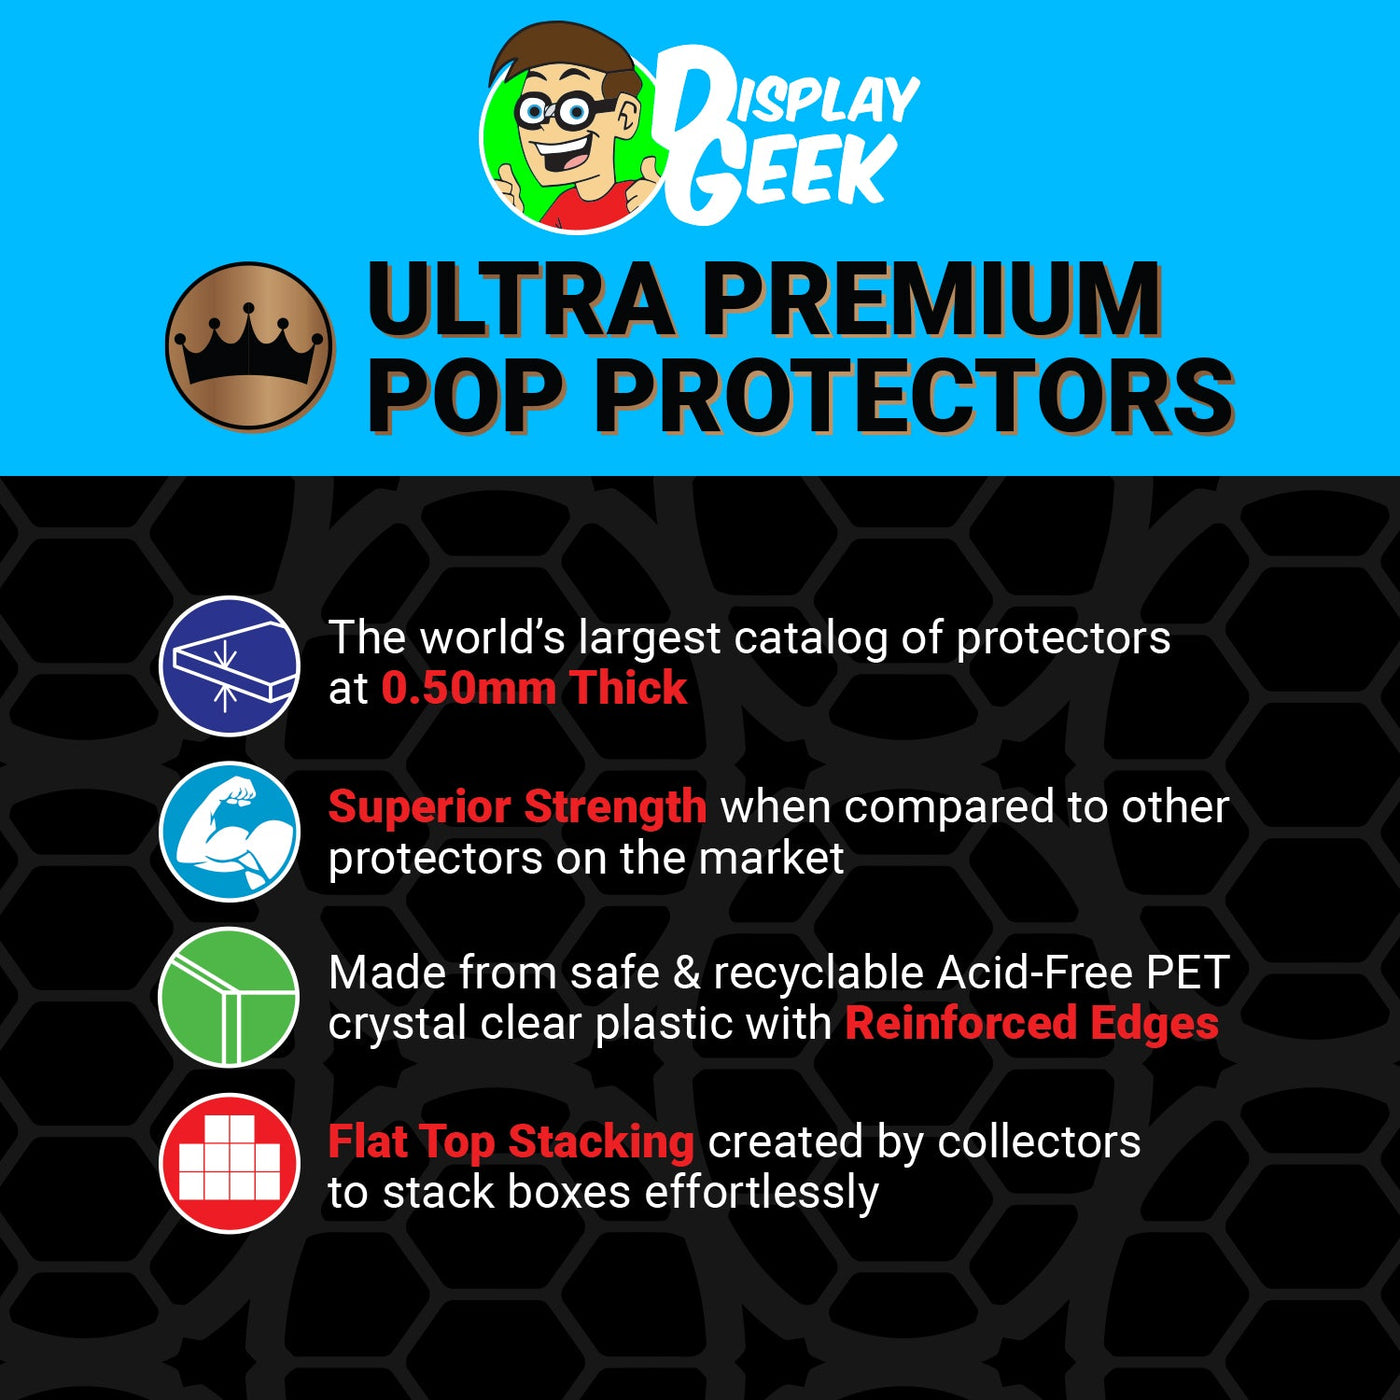 Pop Protector for Freddy Funko Holiday Freddy on The Protector Guide App by Display Geek